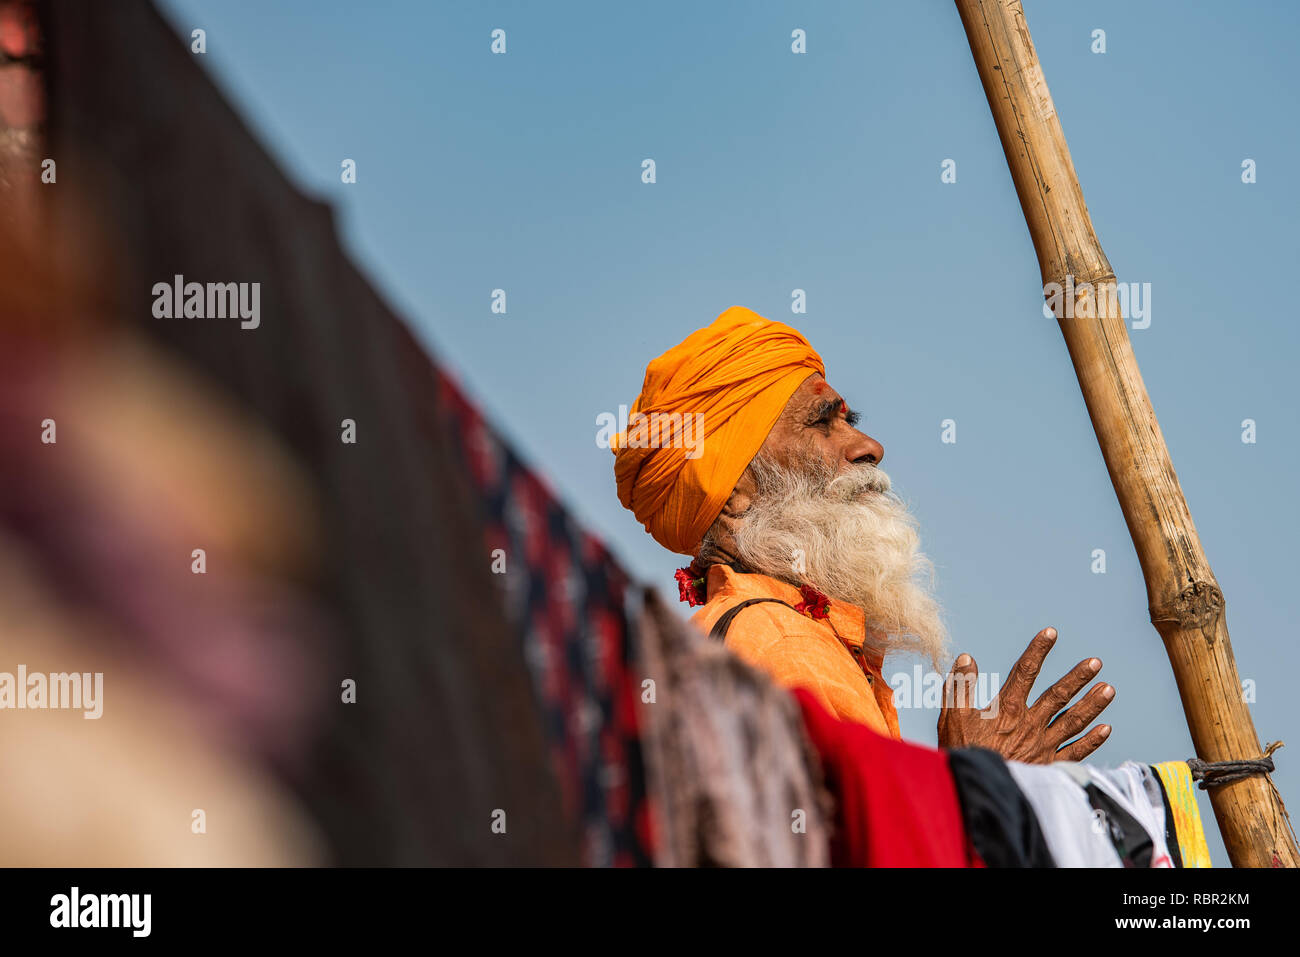 A holy man in prayer with his hands folded framed by a pole and clothes line in Varanasi, India Stock Photo